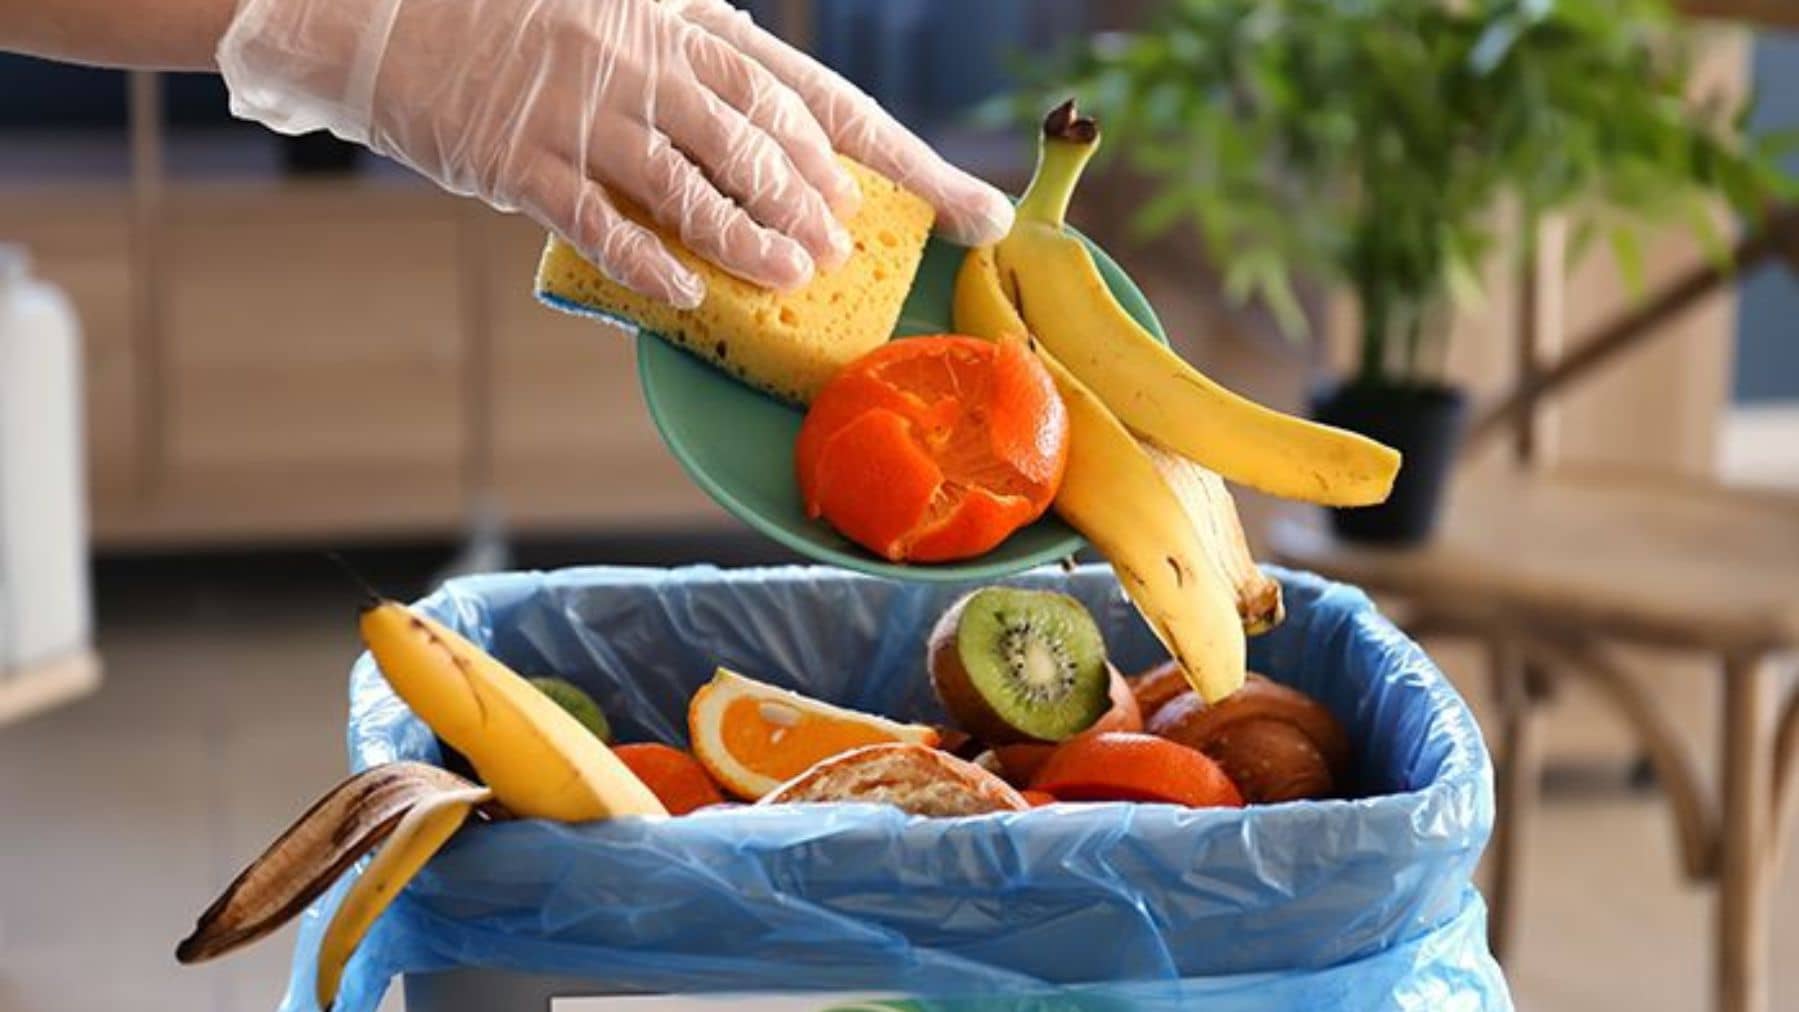 How to reduce your food waste at home